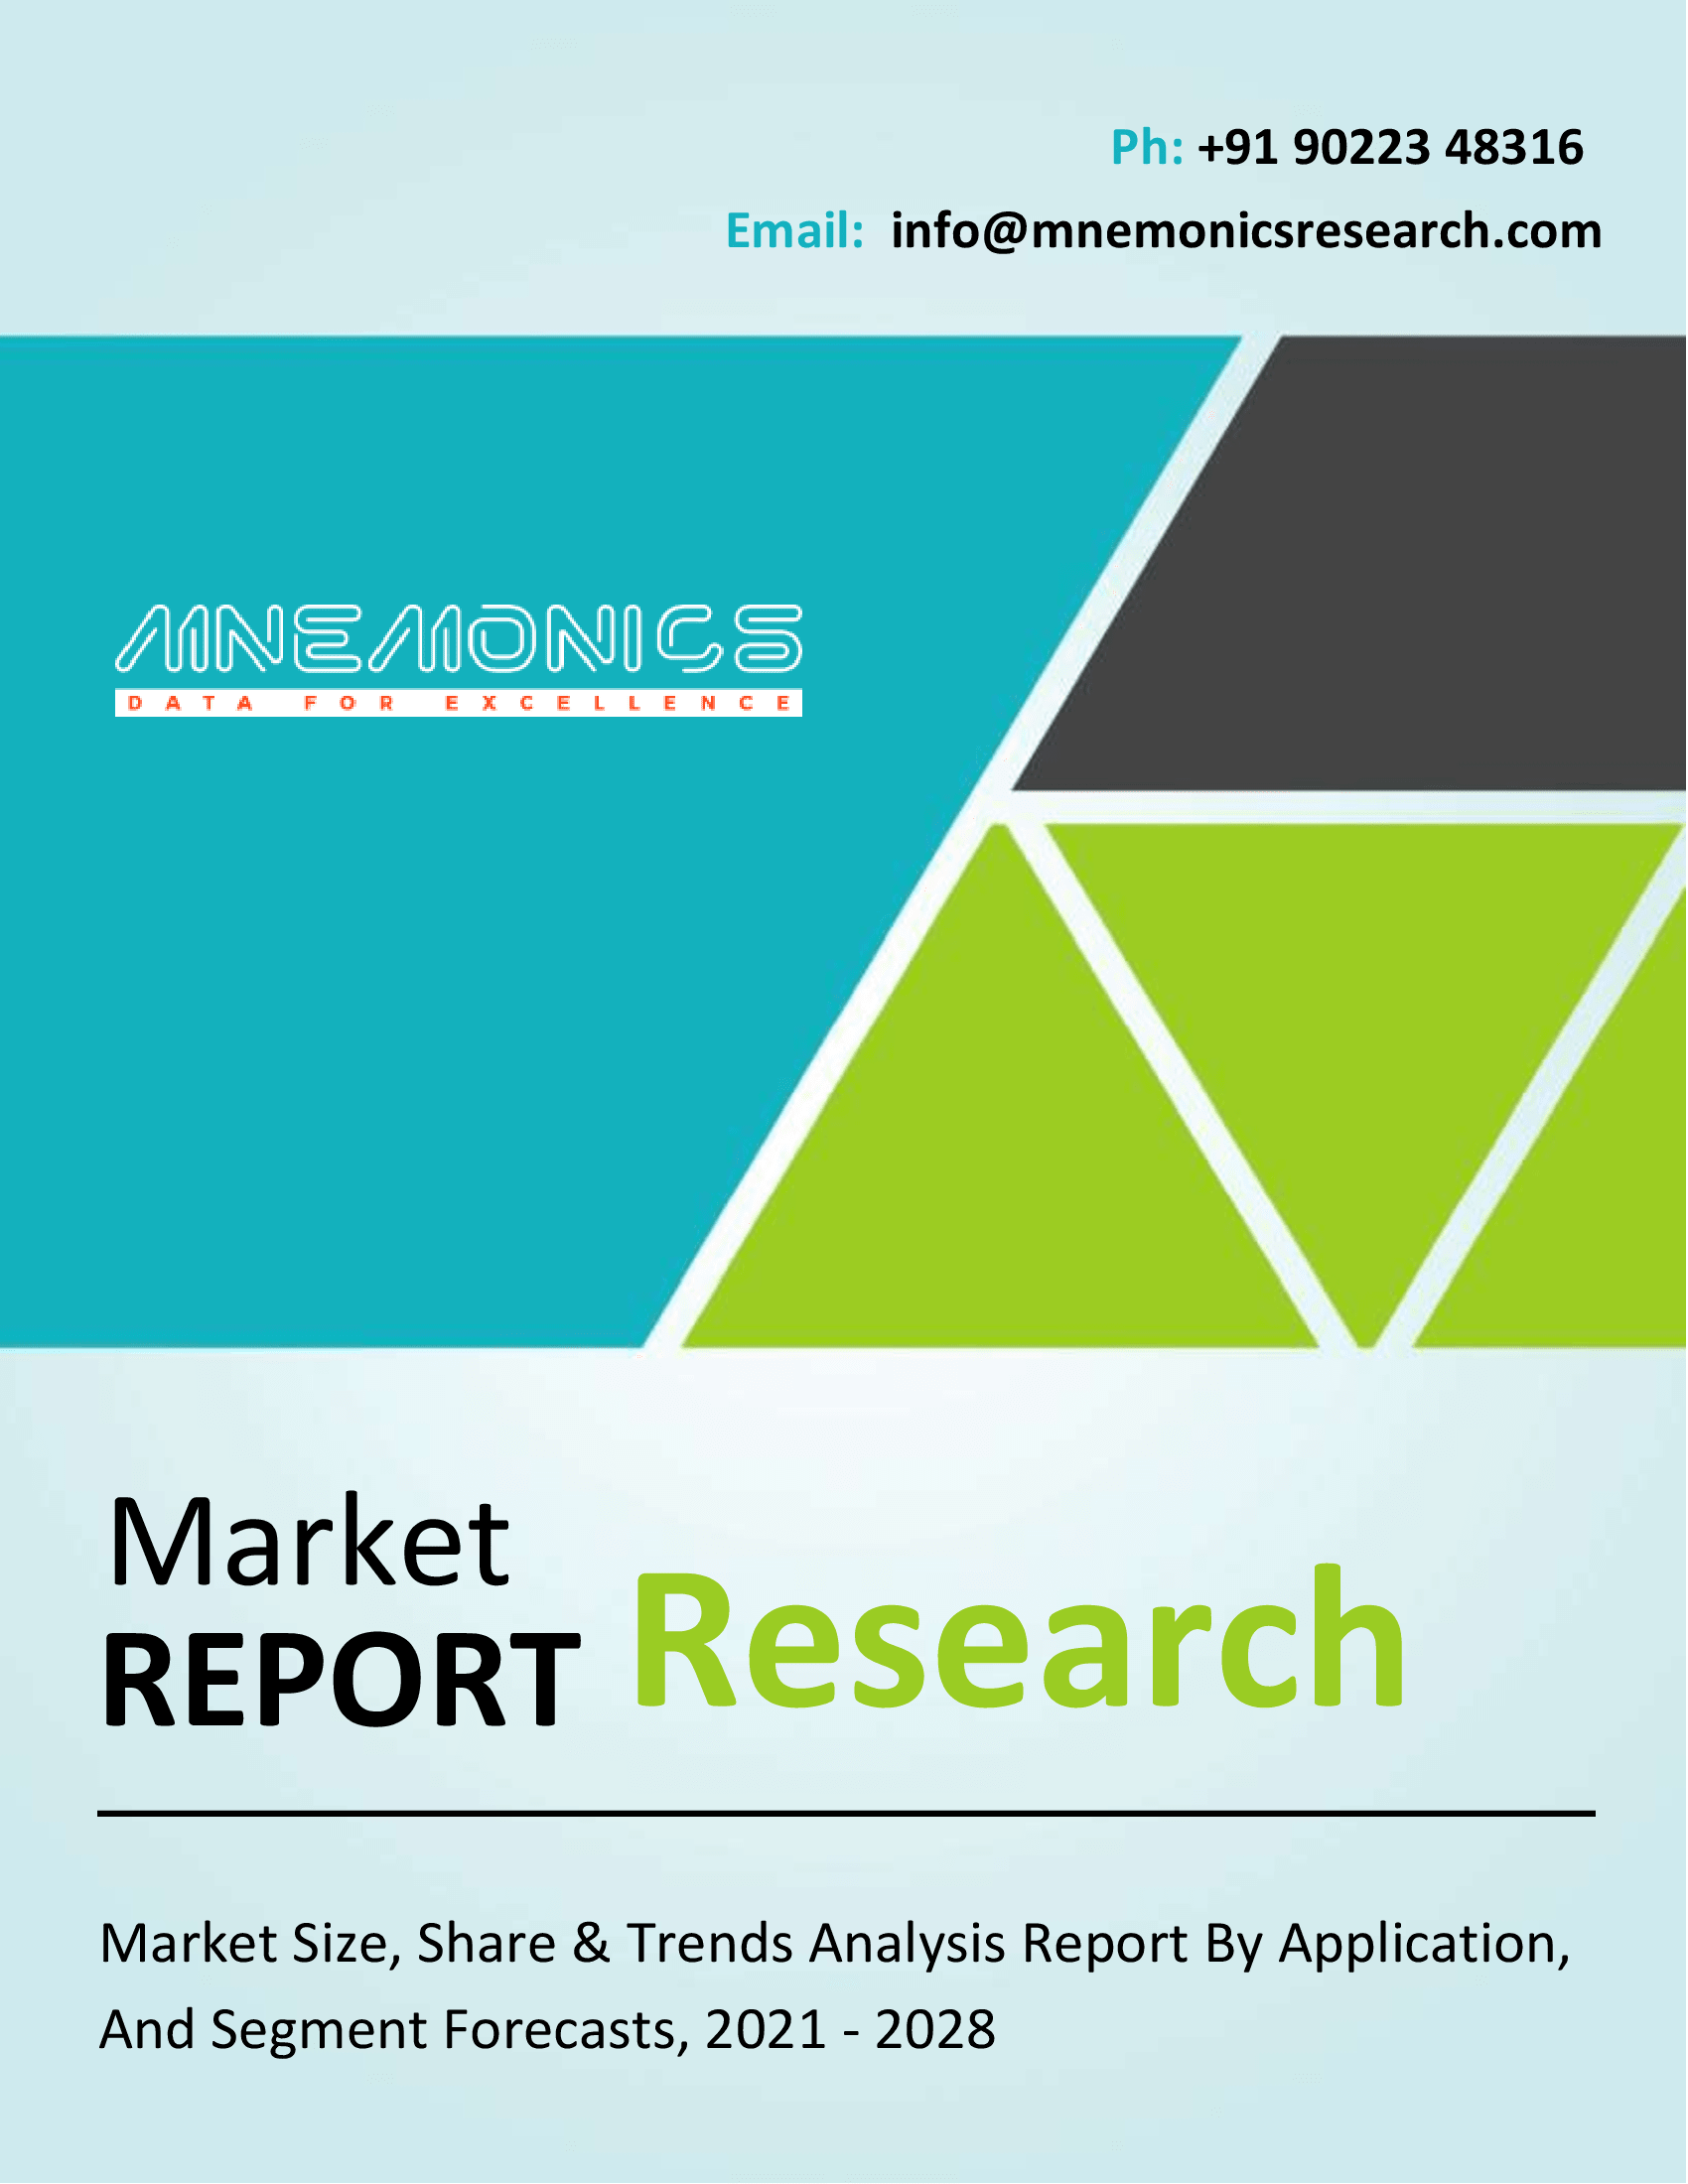 Microducts Market